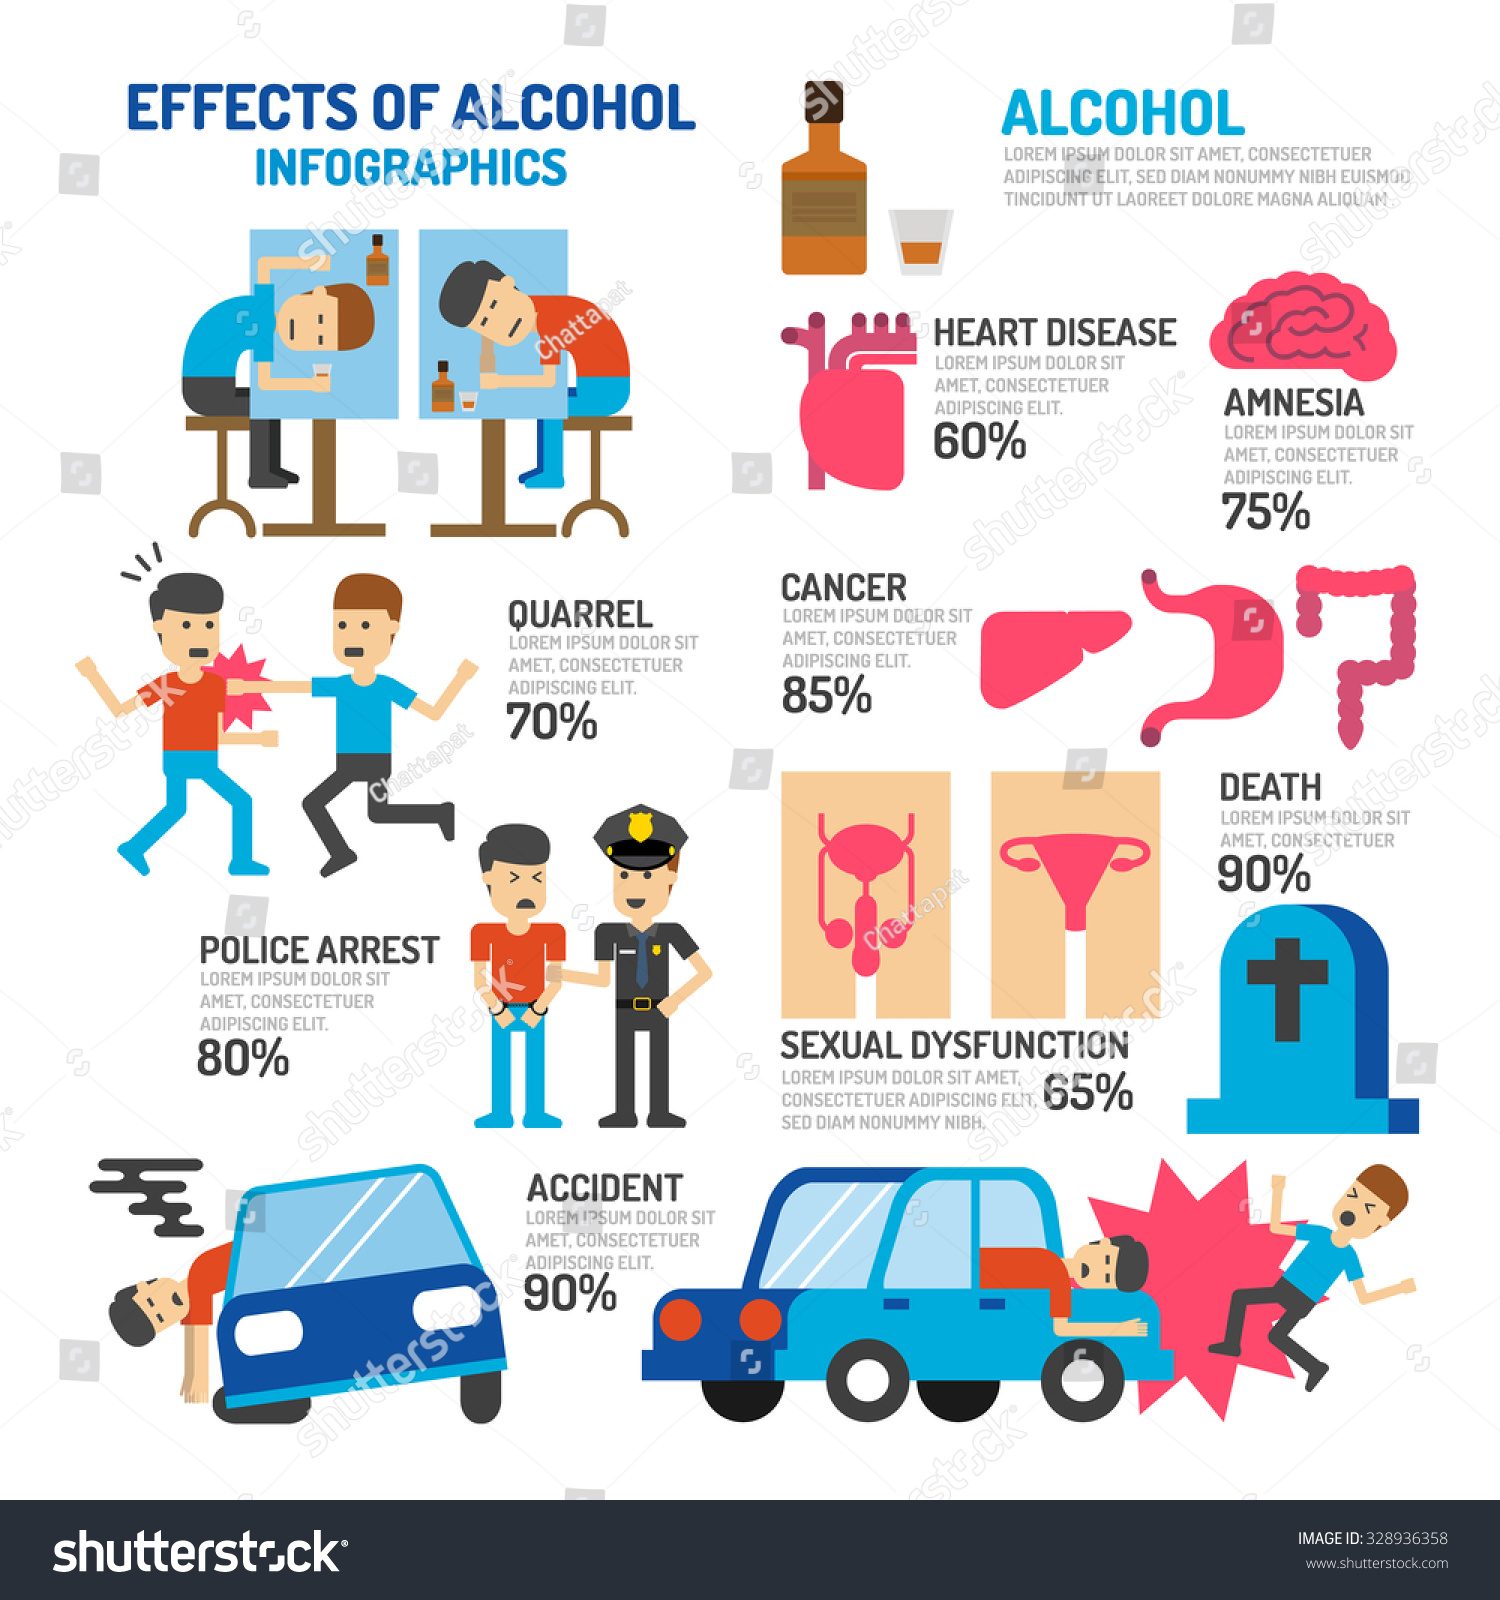 Effects Of Alcohol Infographics Stock Vector Illustration 328936358 Shutterstock 8130